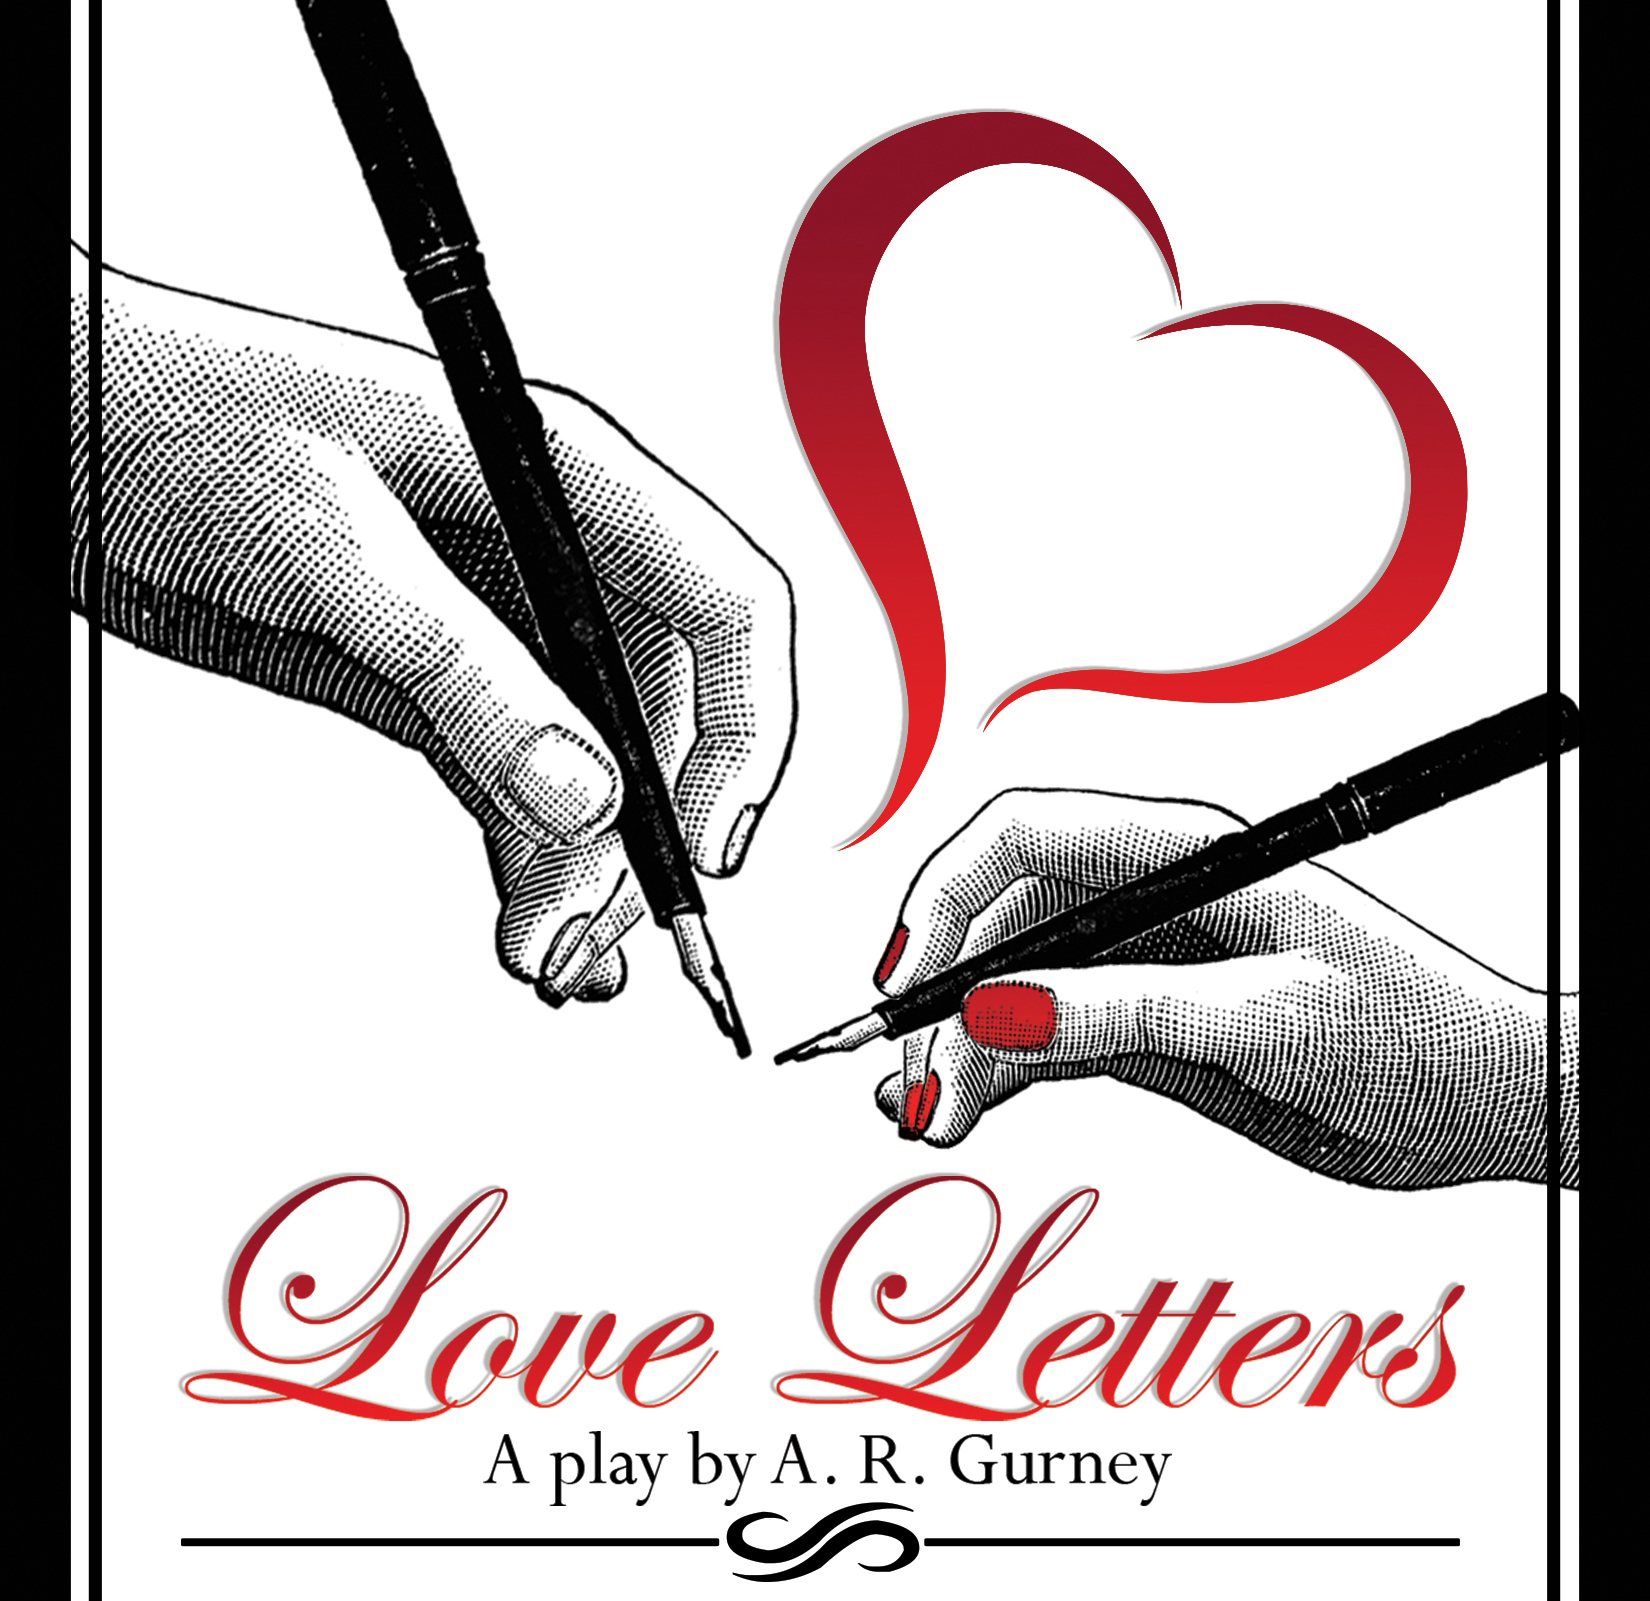 The play “Love Letters” will stage Tuesday at the Northwind Arts Center